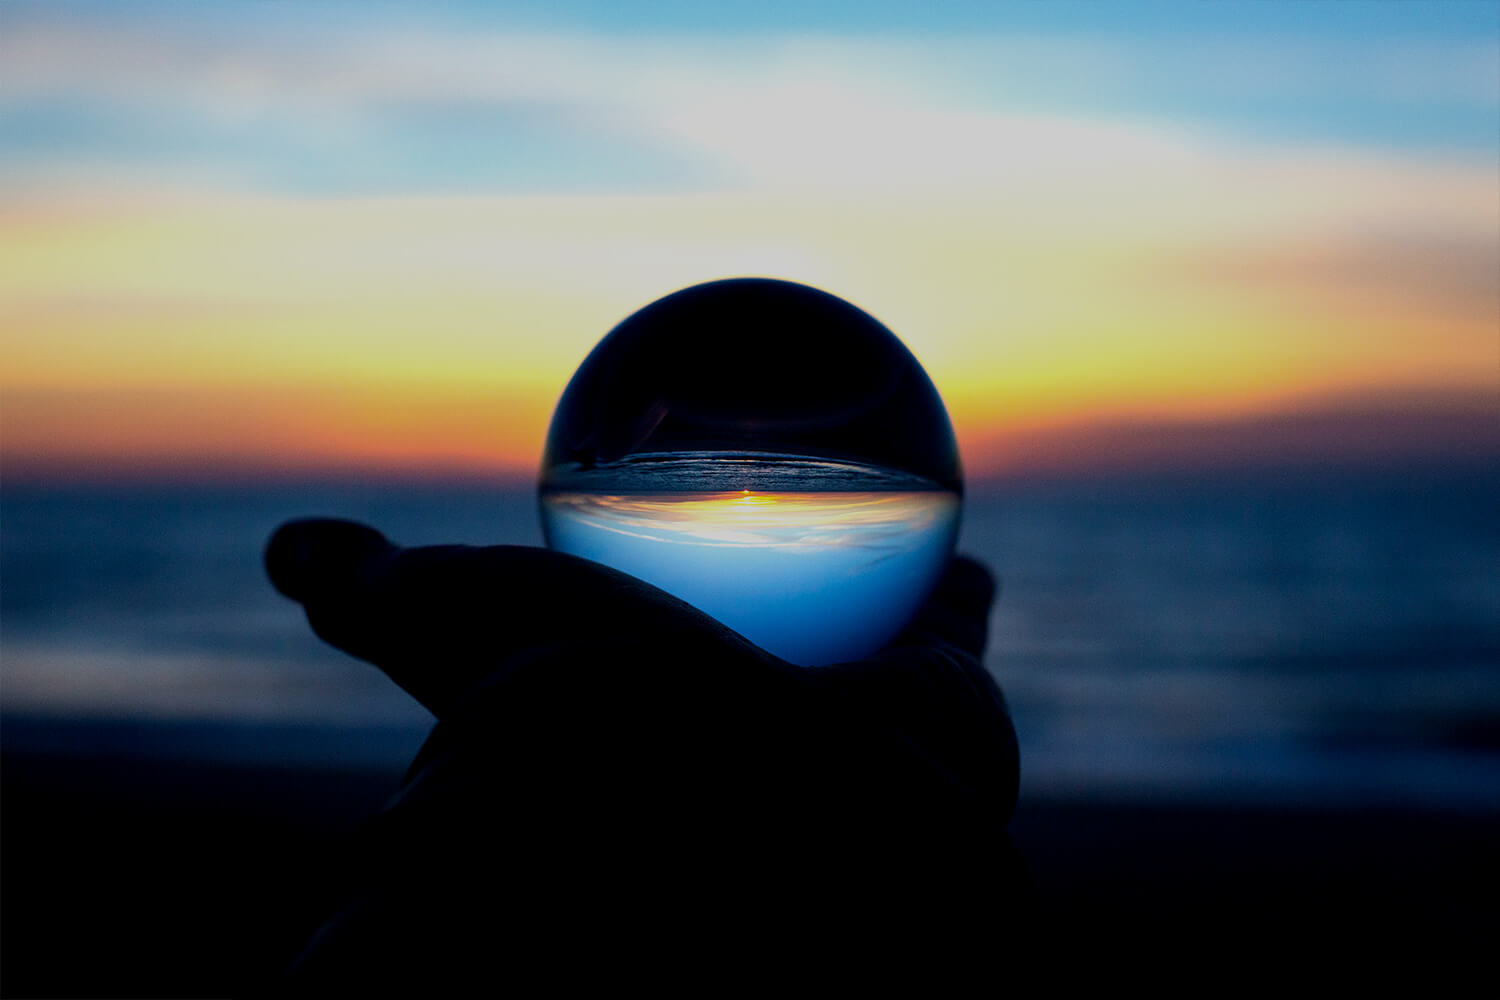 Person holding a glass ball in front of a sunset